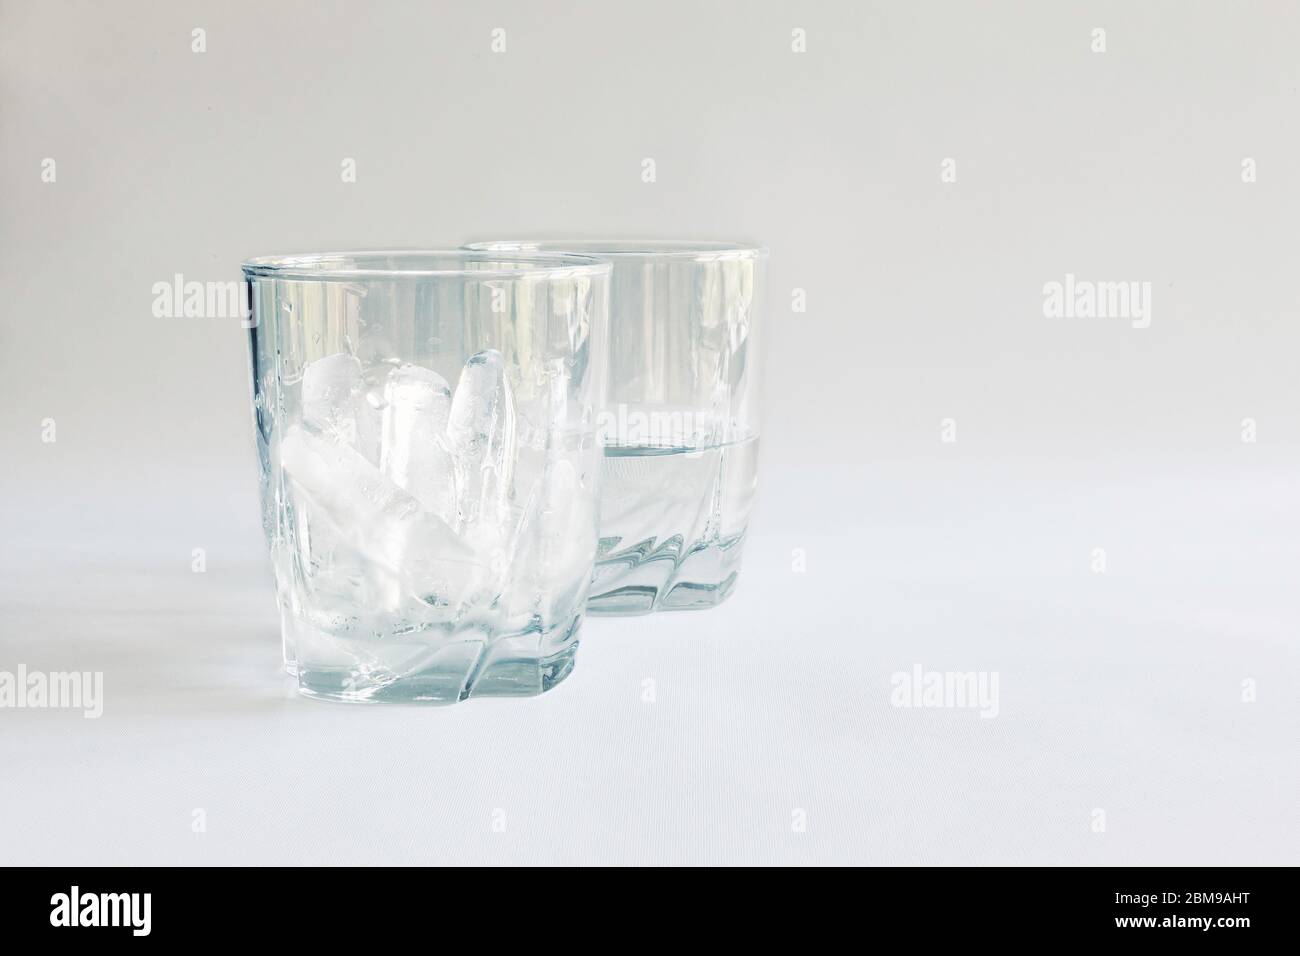 Tumbler full of ice with a second glass half full of water (ice melted), Virginia, United States, color Stock Photo